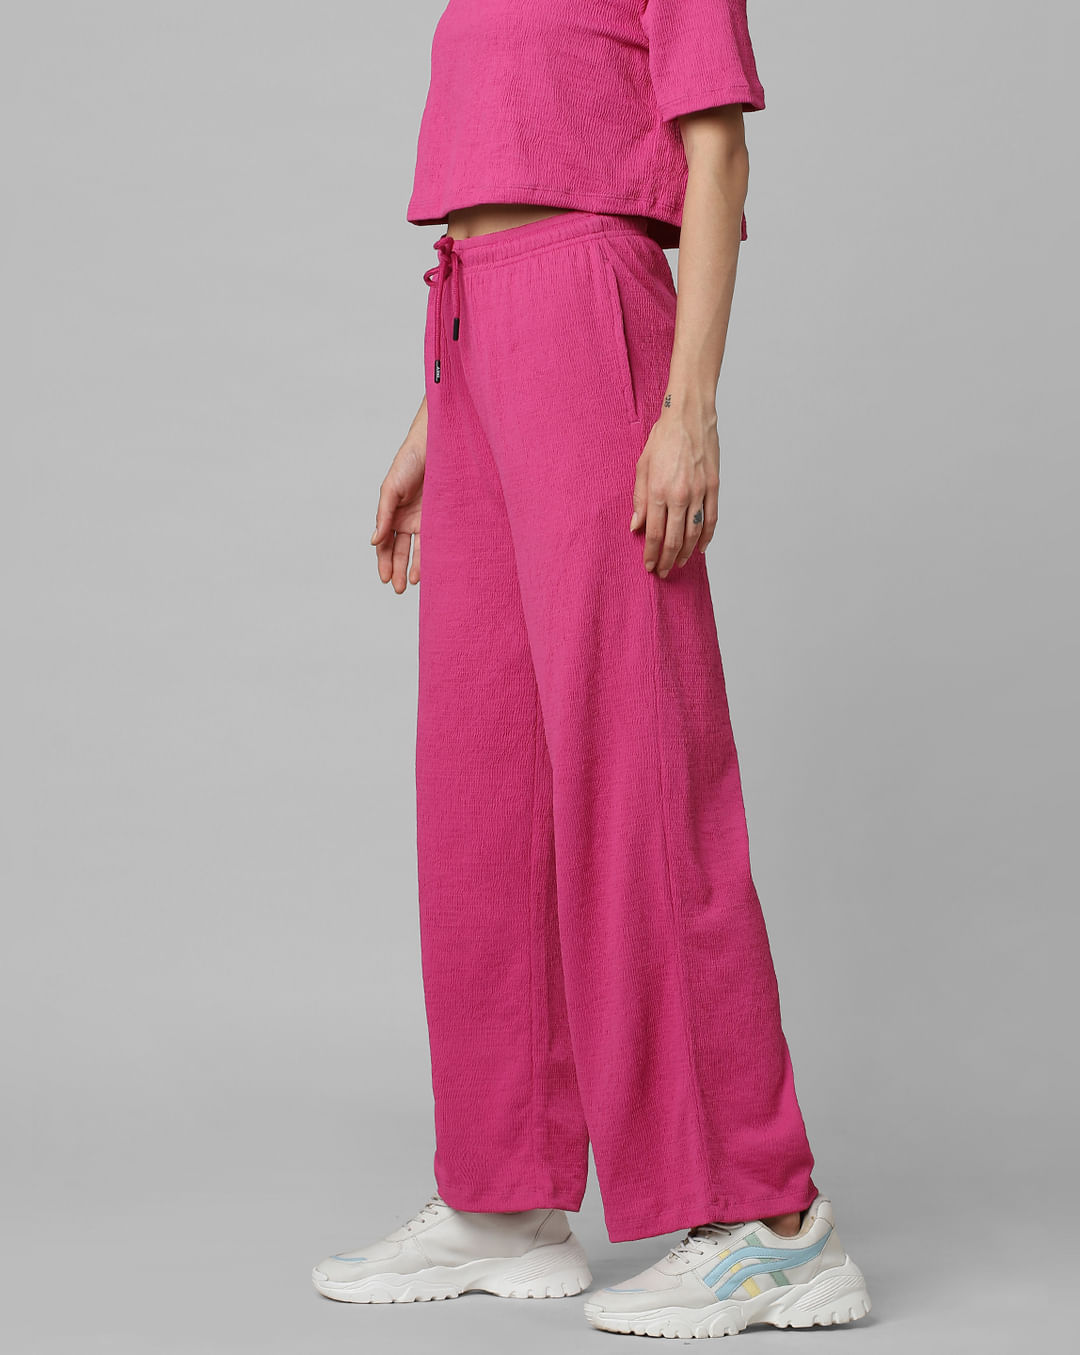 Unique21 high rise cargo pants in pink